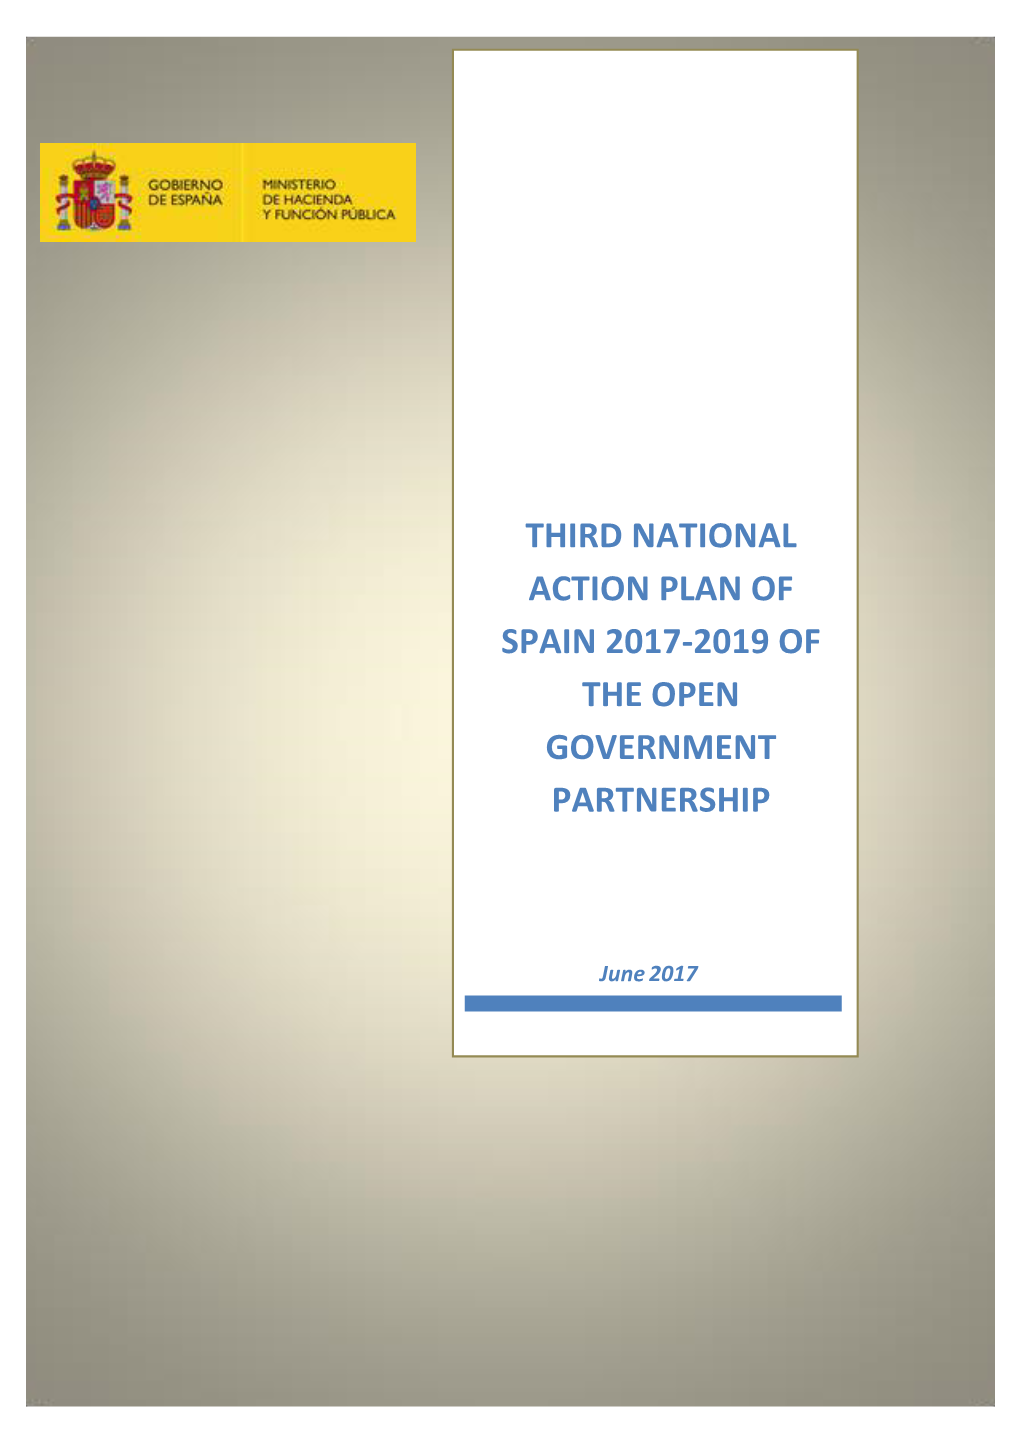 Third National Action Plan of Spain 2017-2019 of the Open Government